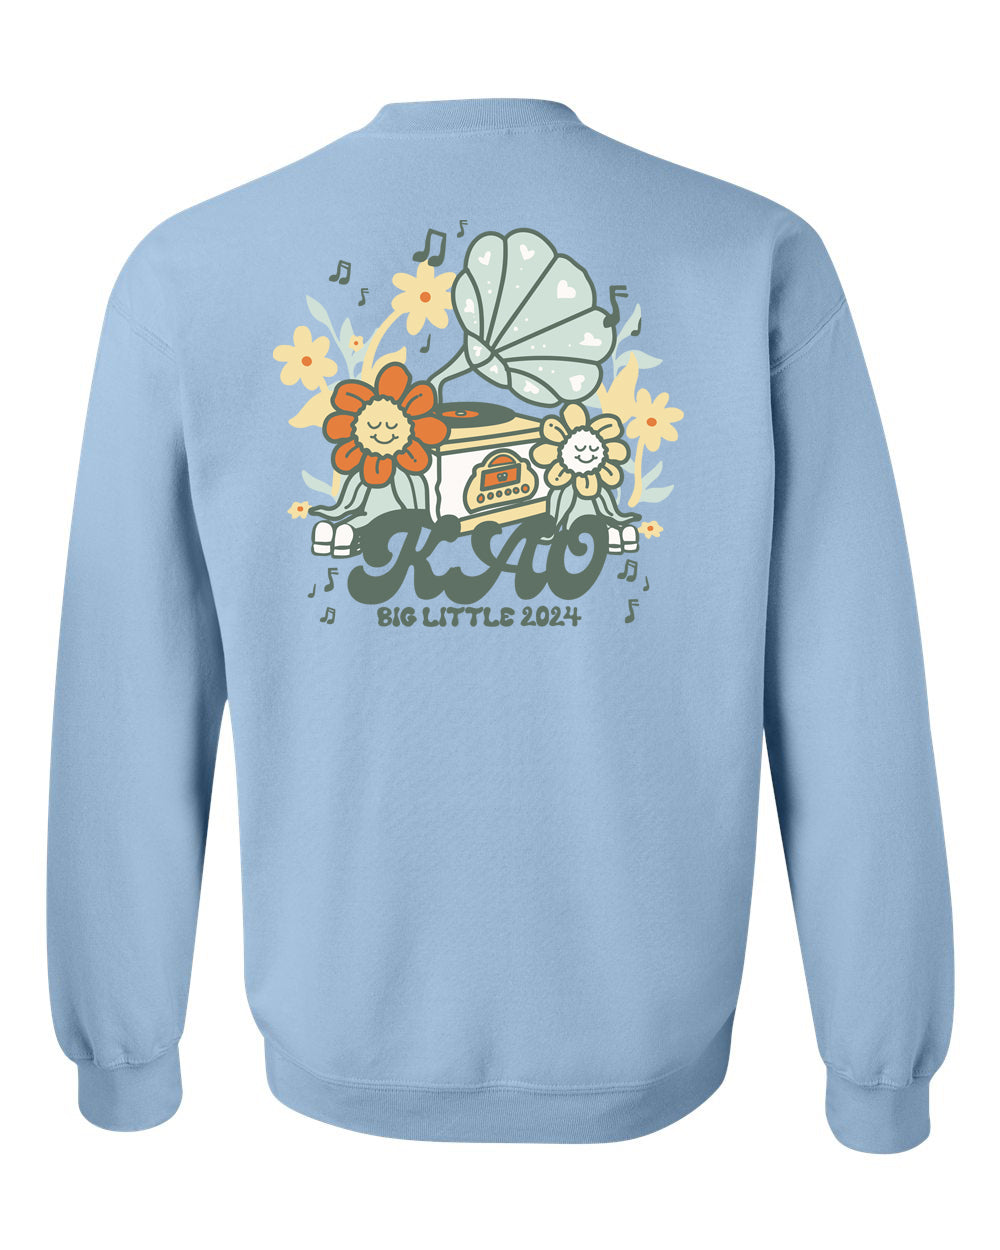 a light blue sweatshirt with an image of a baby carriage